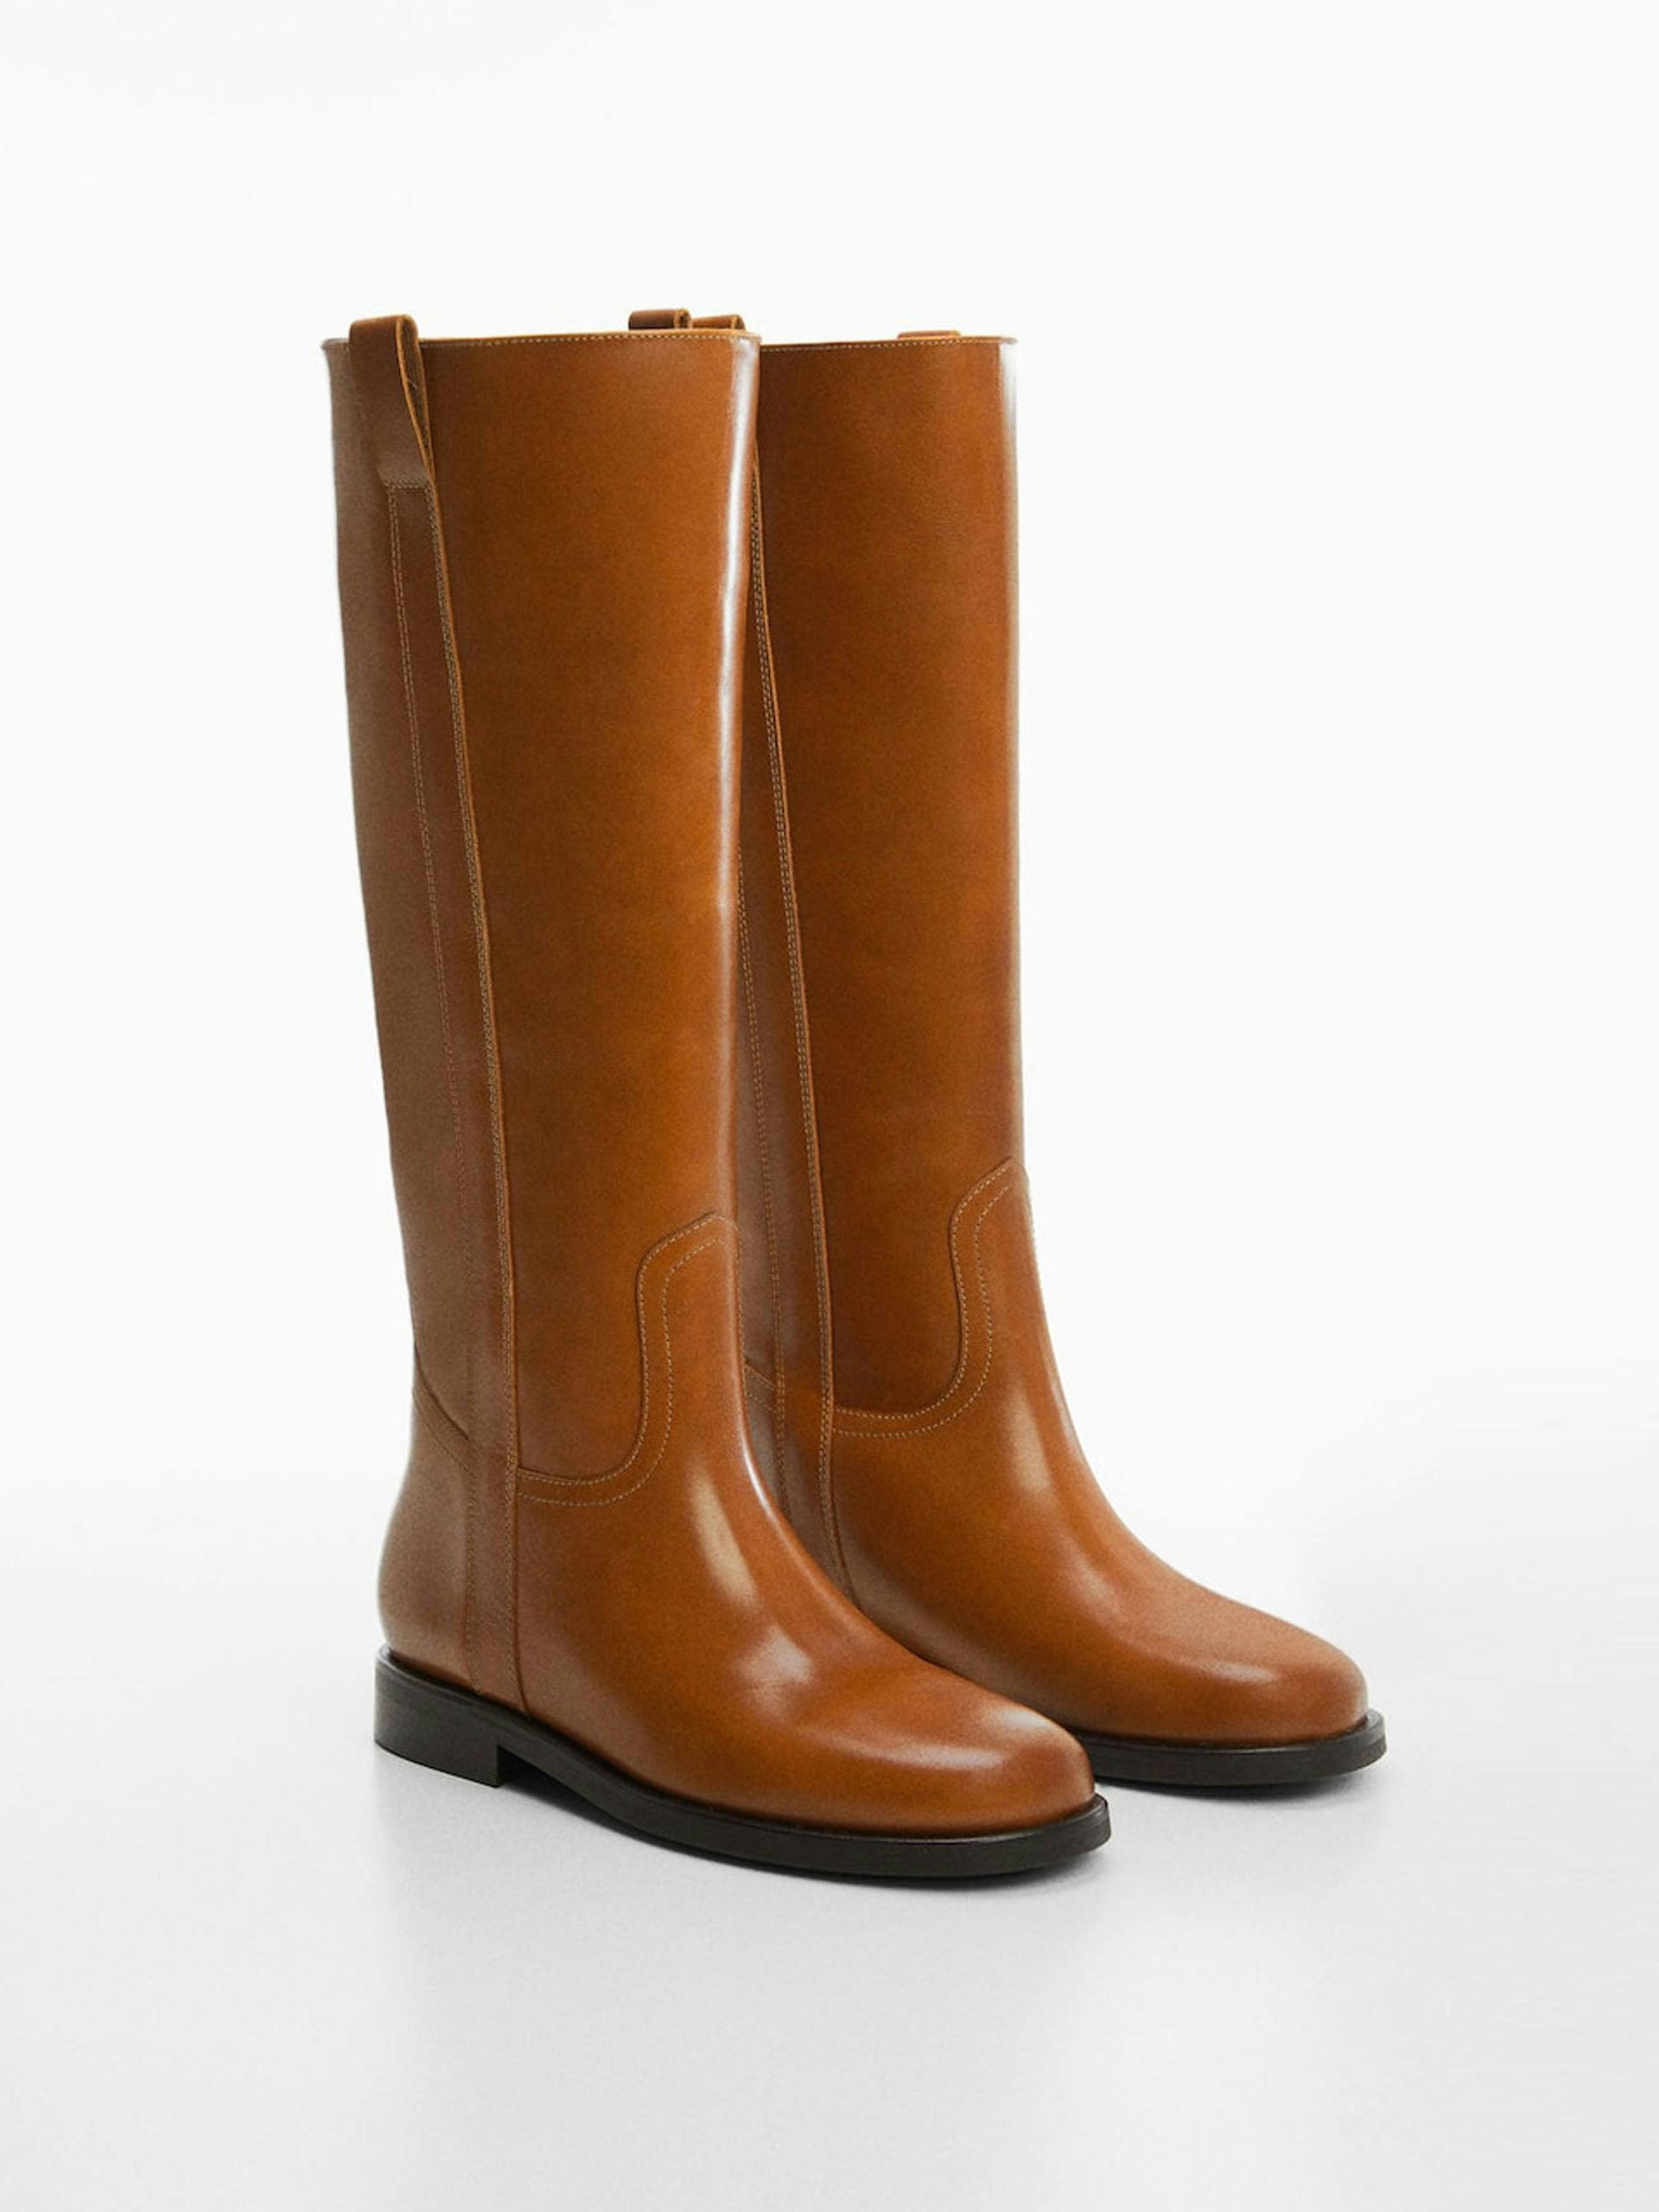 Brown leather knee-high boots